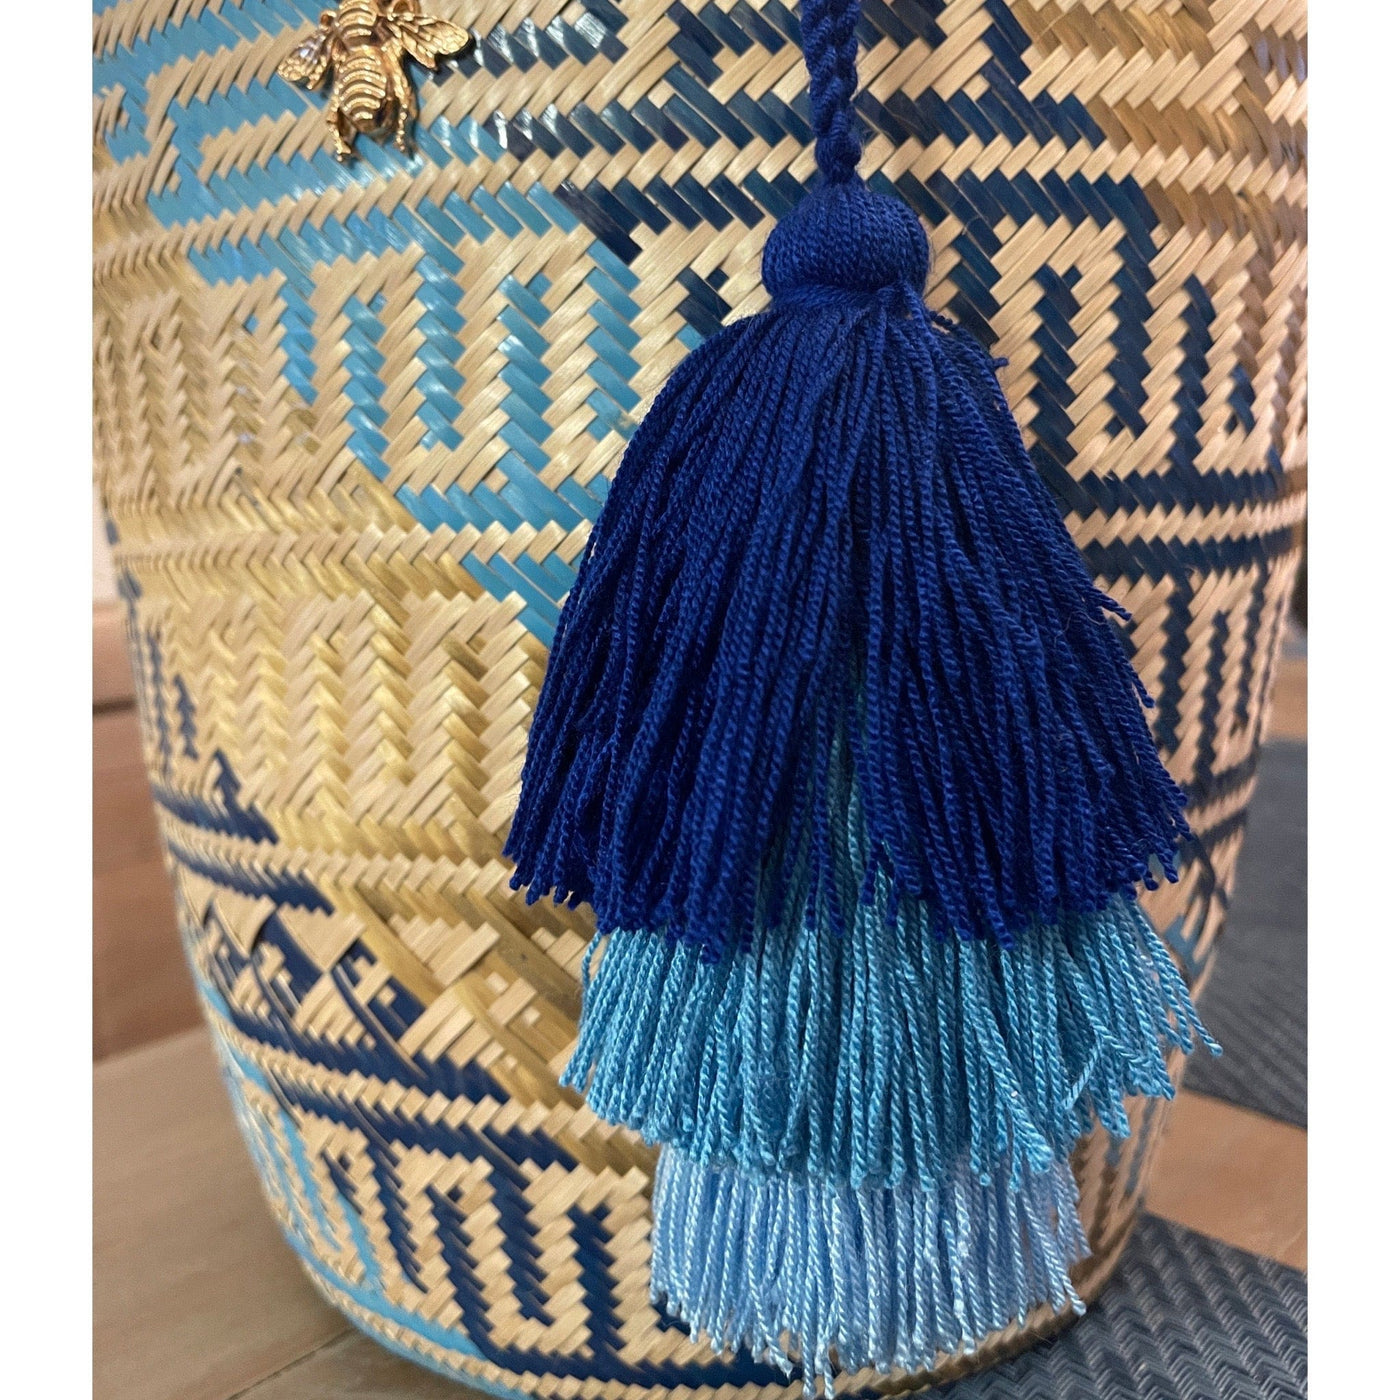 BeeLoved Custom Artisan Bags and Gifts Shades of Blue Pom Tassle